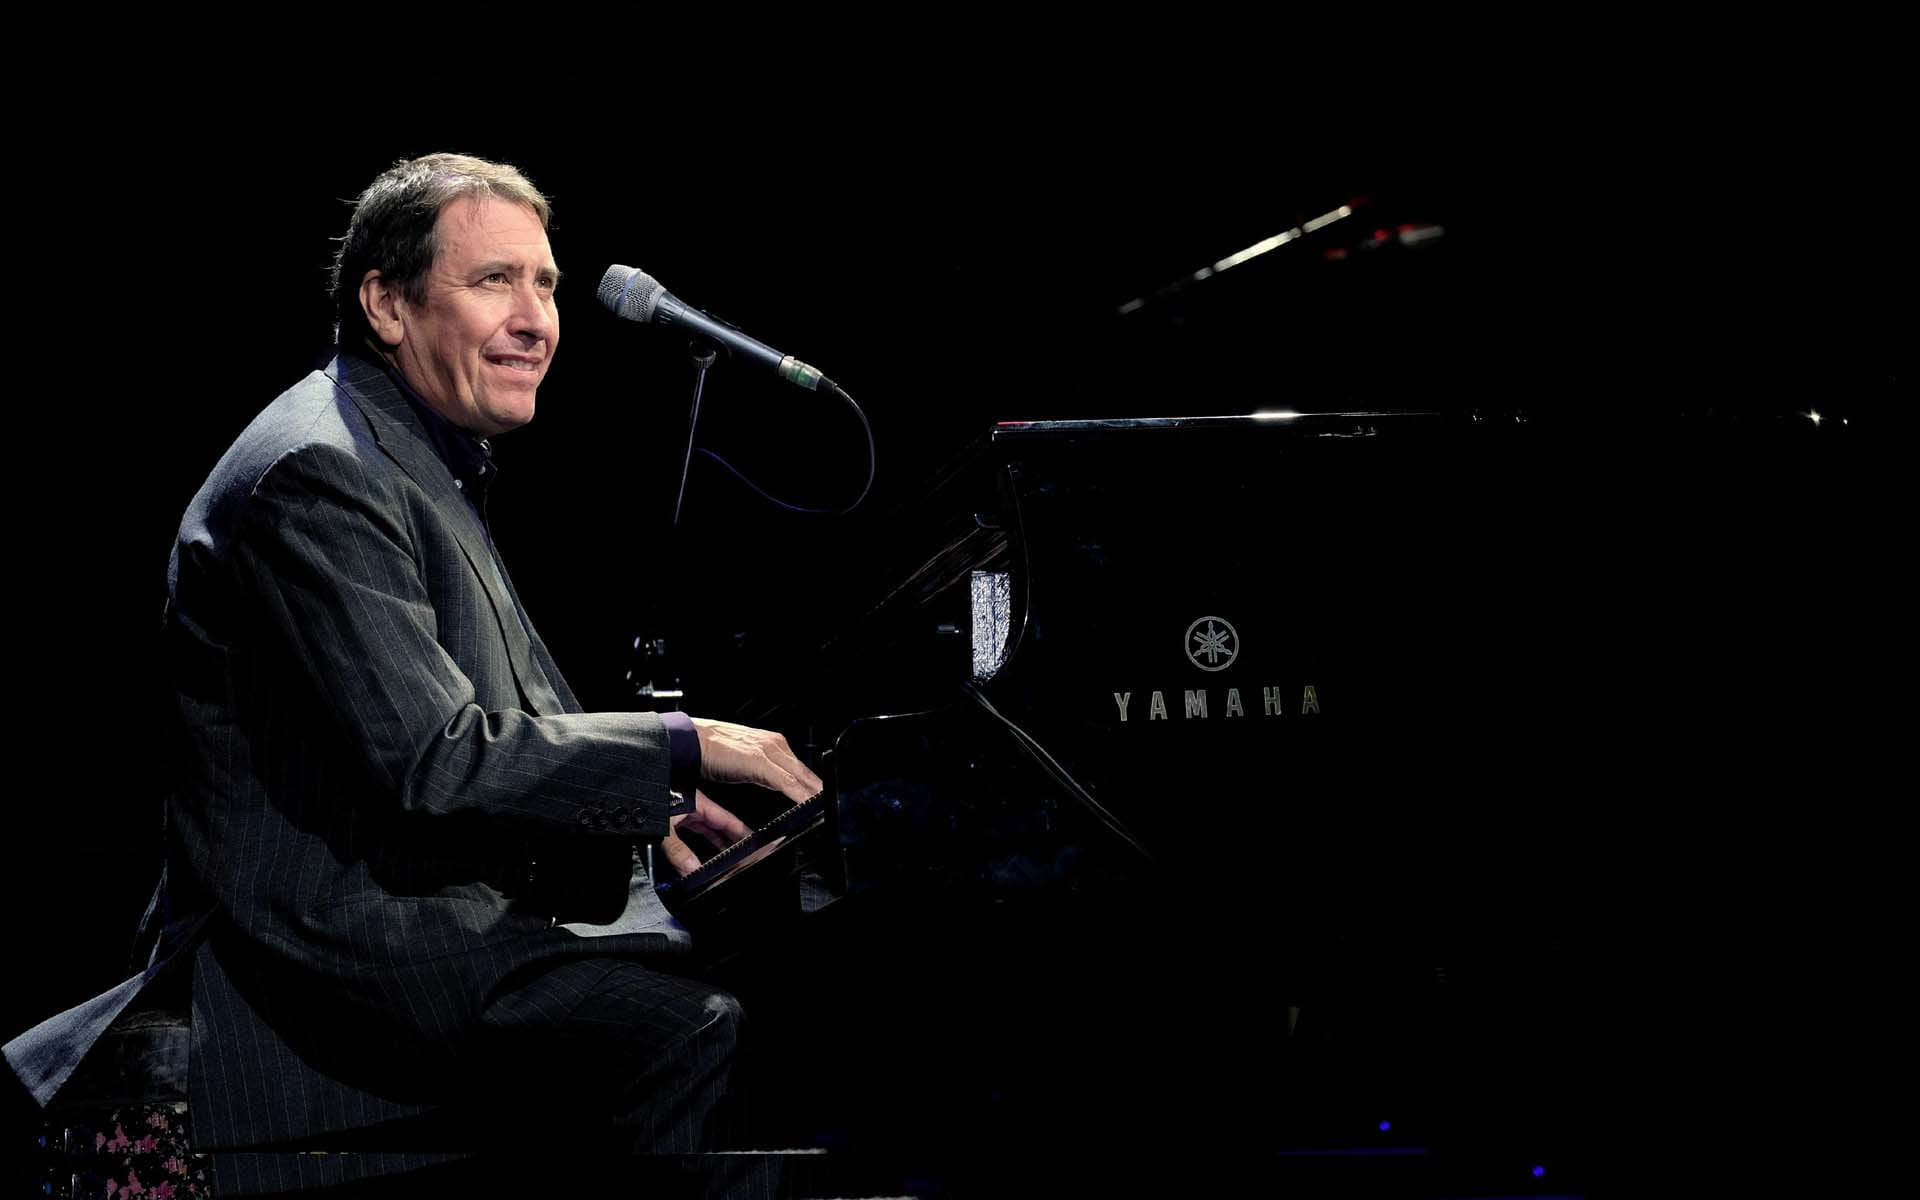 Musician Jools Holland playing a piano with a black backdrop